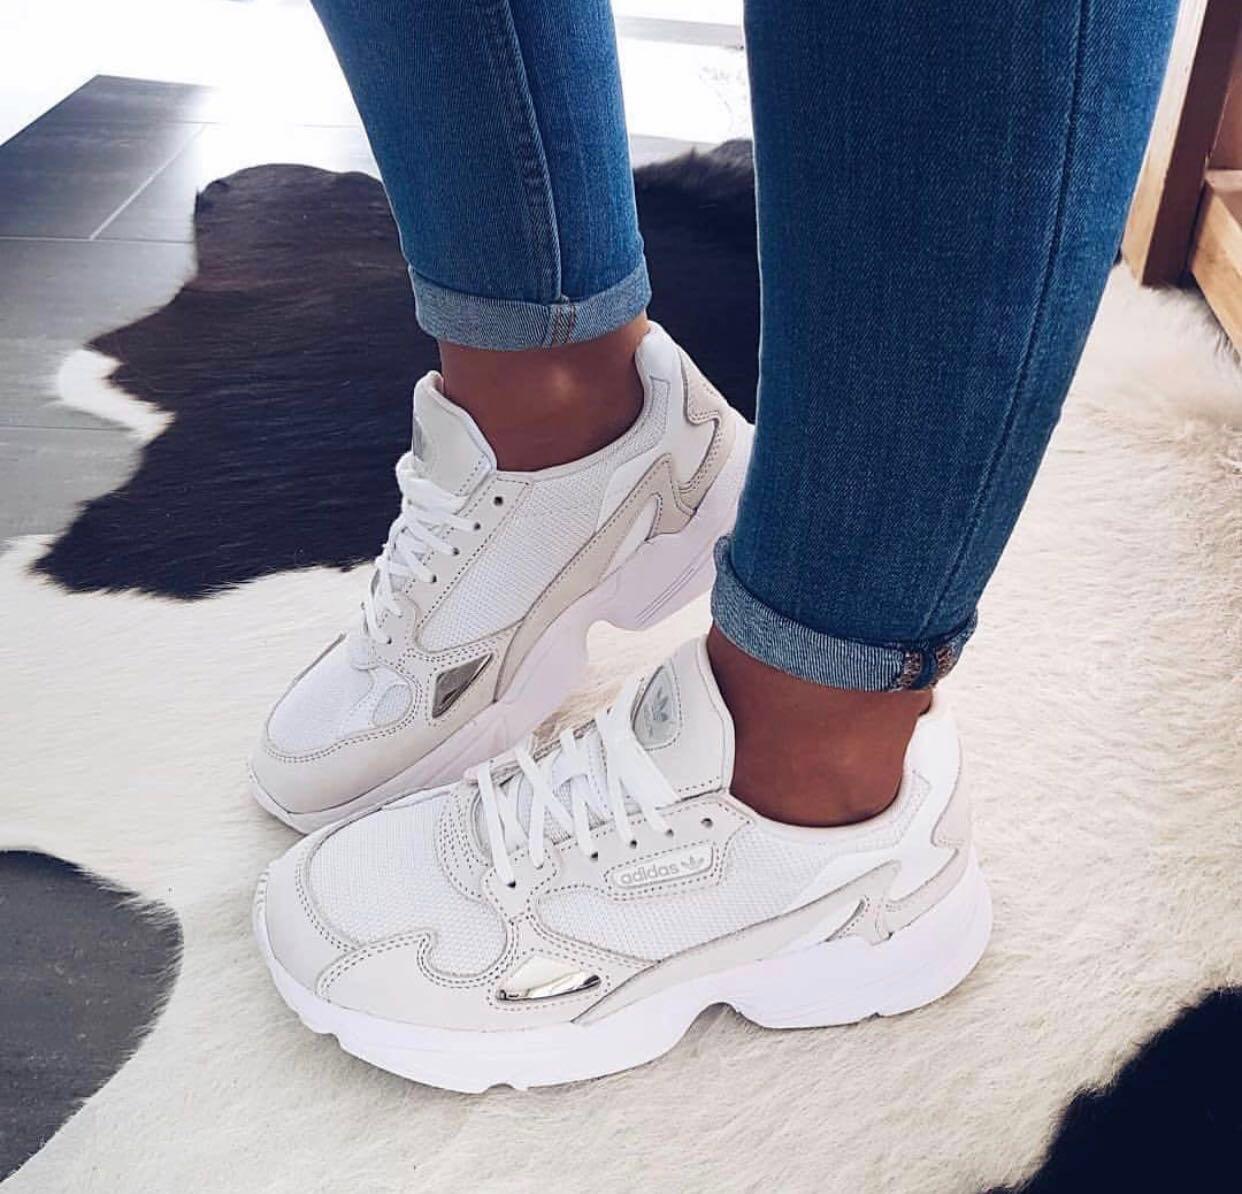 kylie jenner adidas falcon shoes